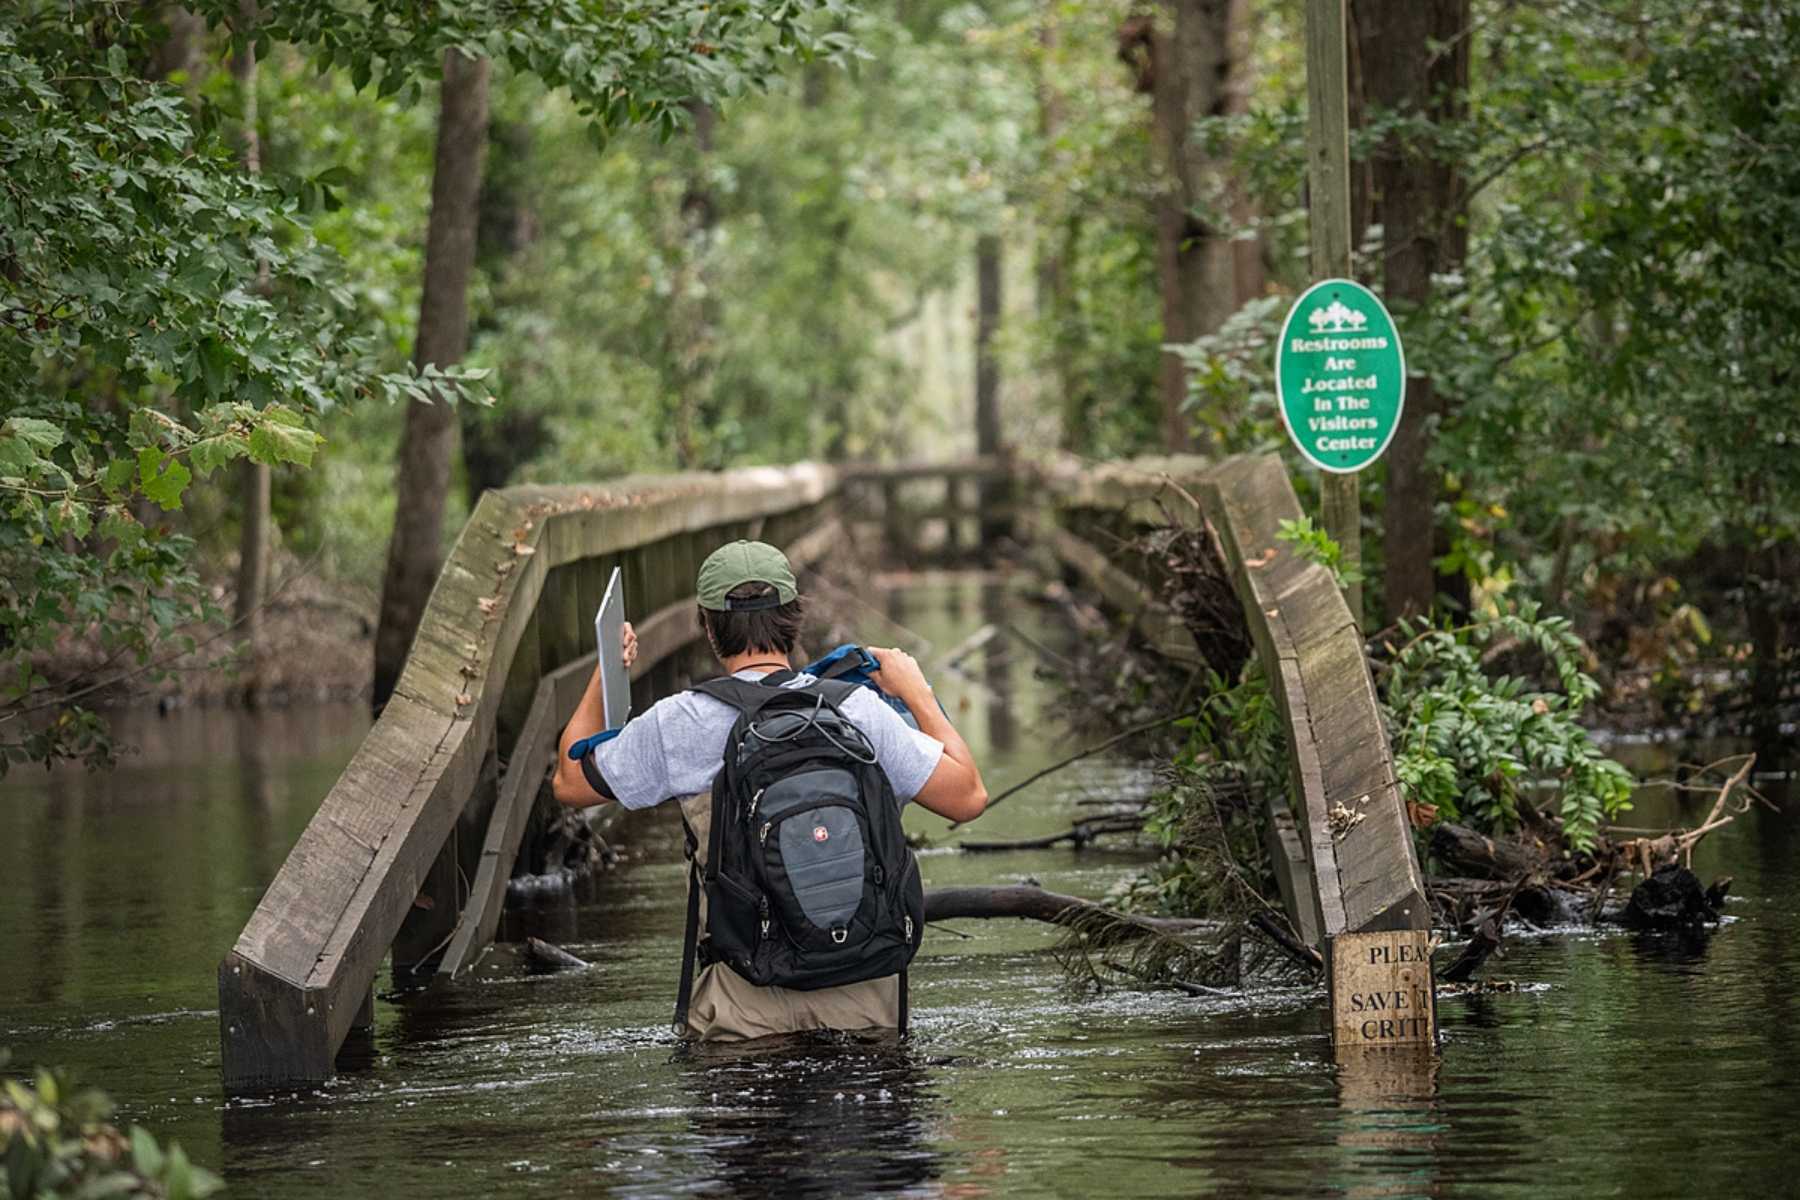 Patrick Connell, a member of Waterkeeper Alliance, walking through a river affected by Hurricane Florence